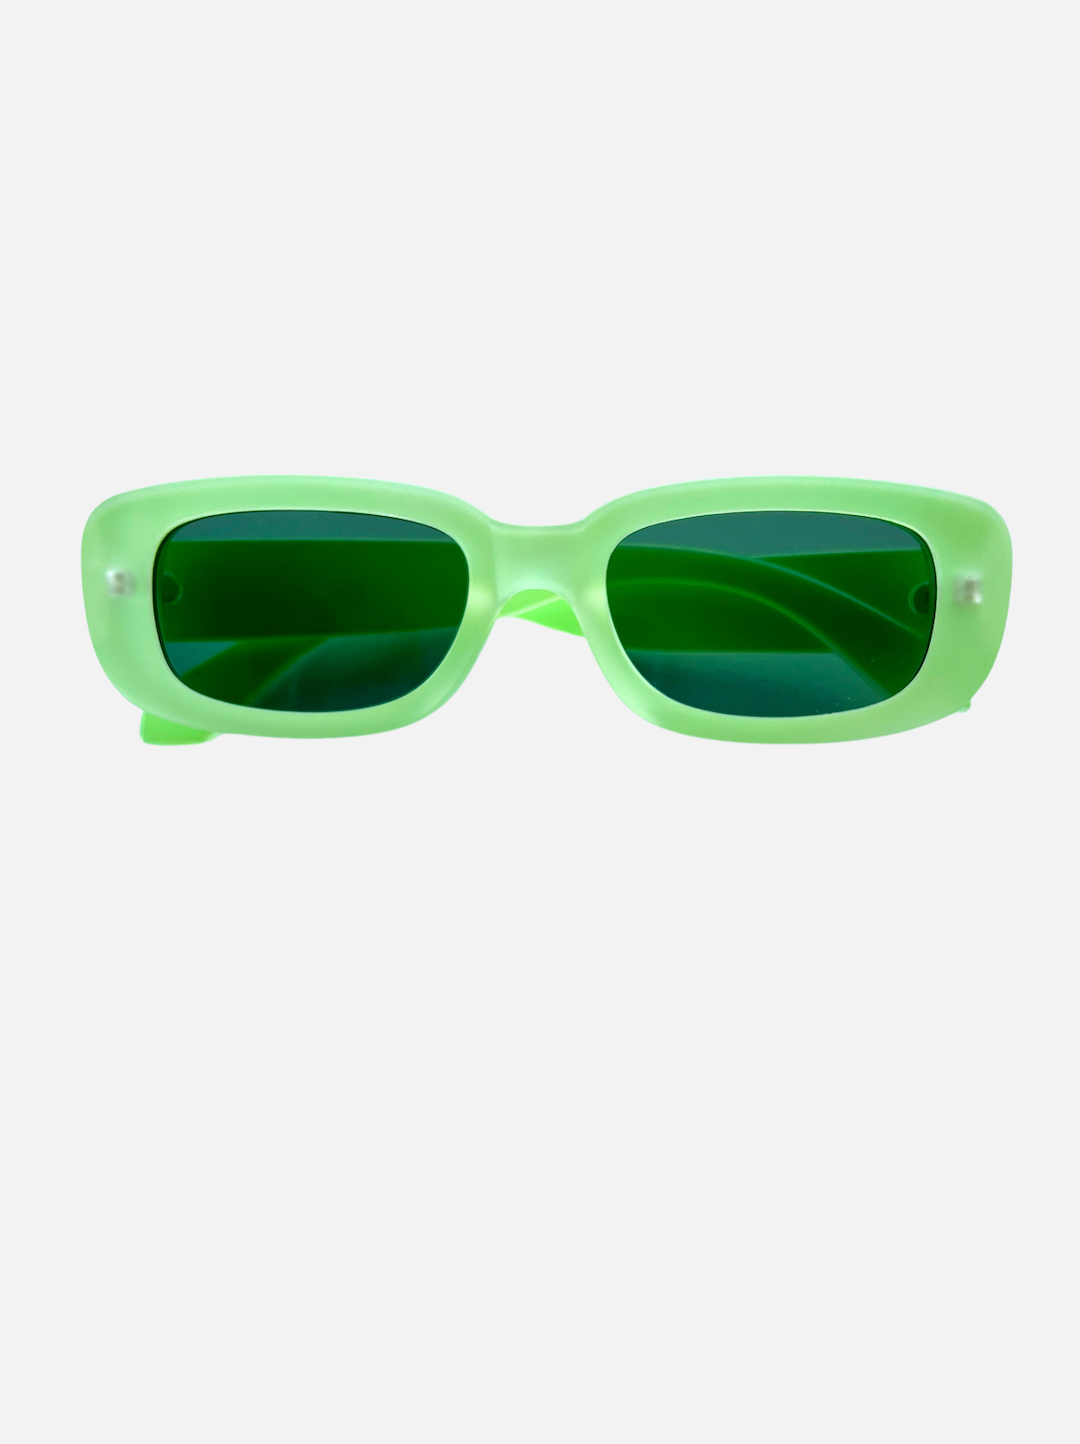 Mint Frosted | A pair of kids' sunglasses with blue lenses inside mint green frames